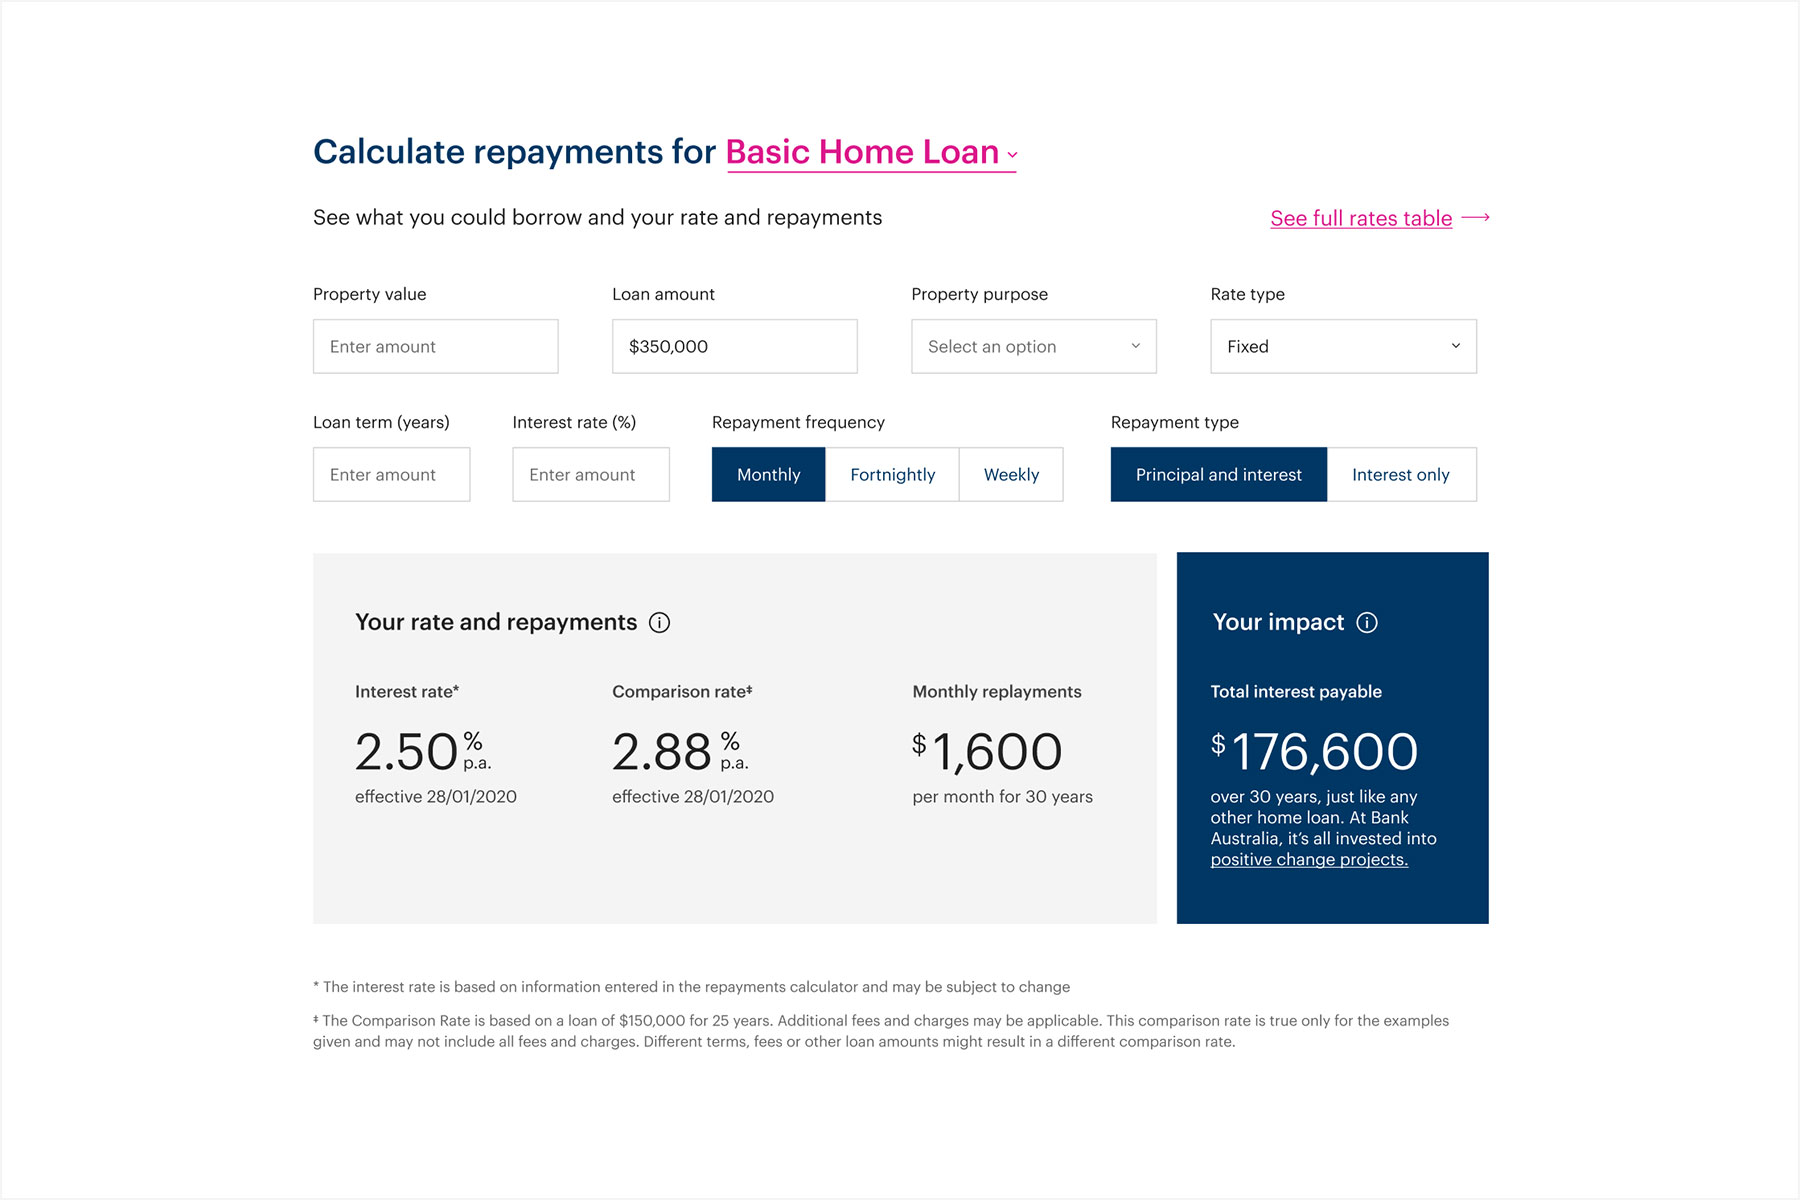 A screenshot of the mortgage calculator on the website.